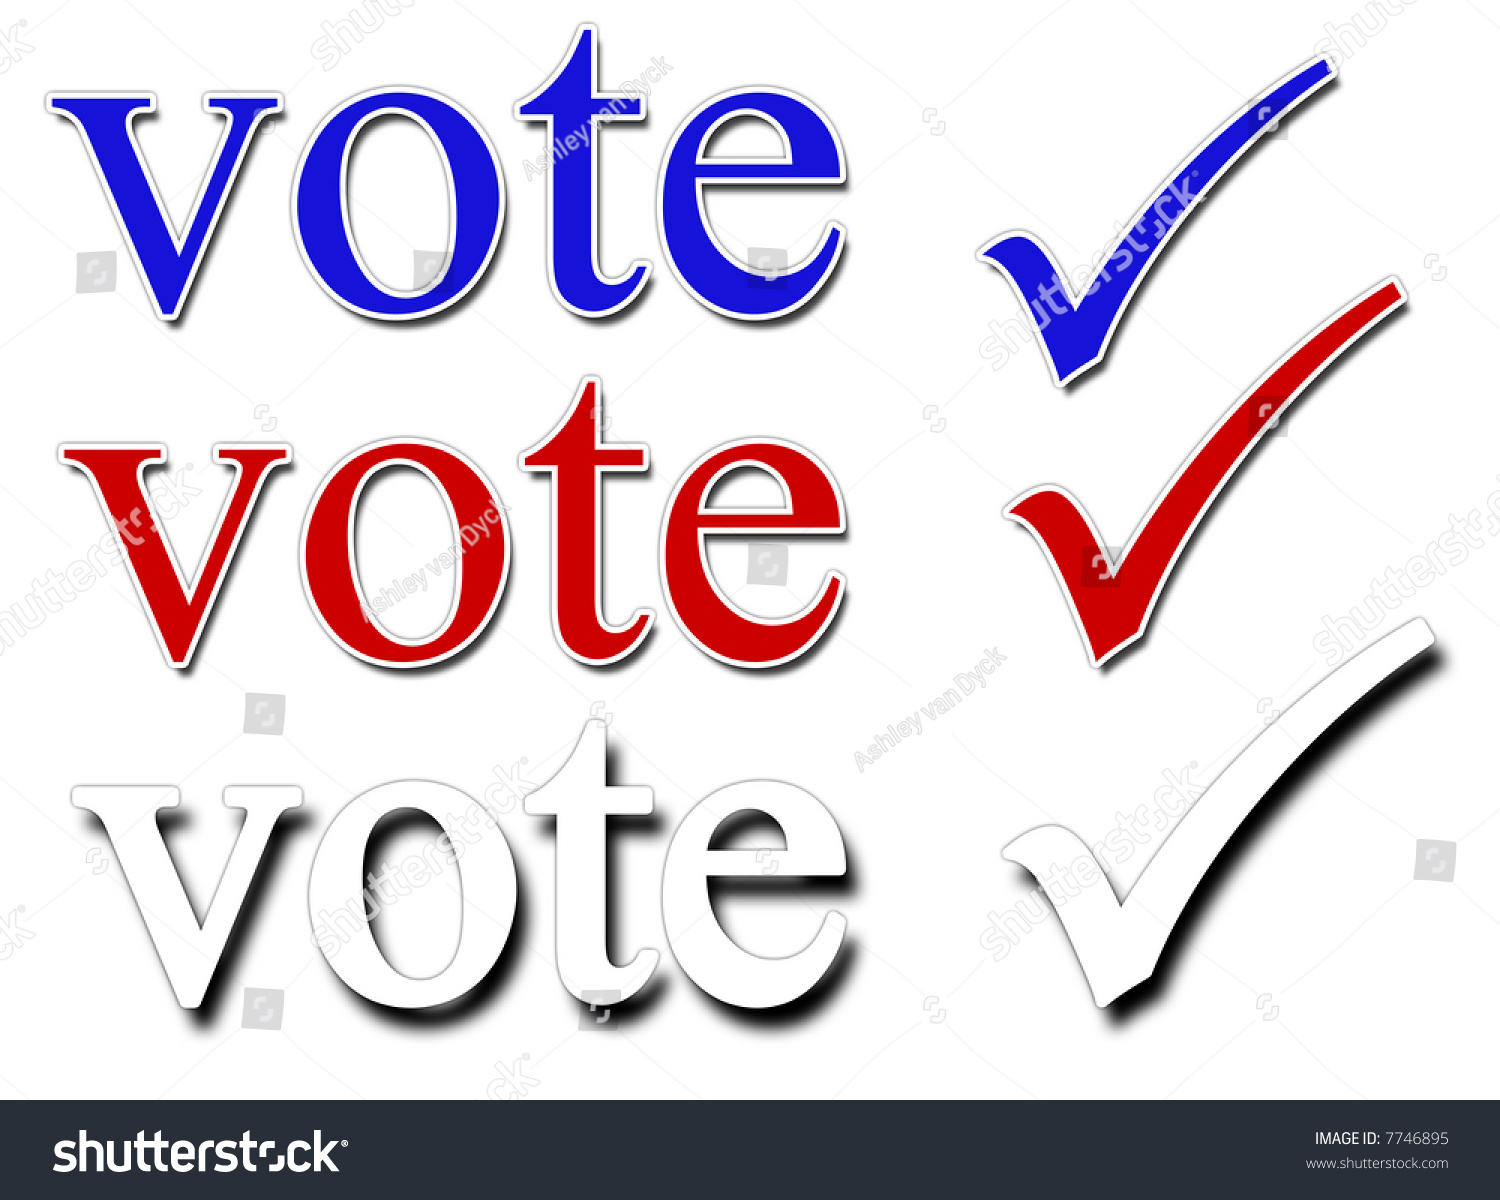 stock-photo-red-white-and-blue-vote-and-tick-symbols-for-elections-7746895.jpg